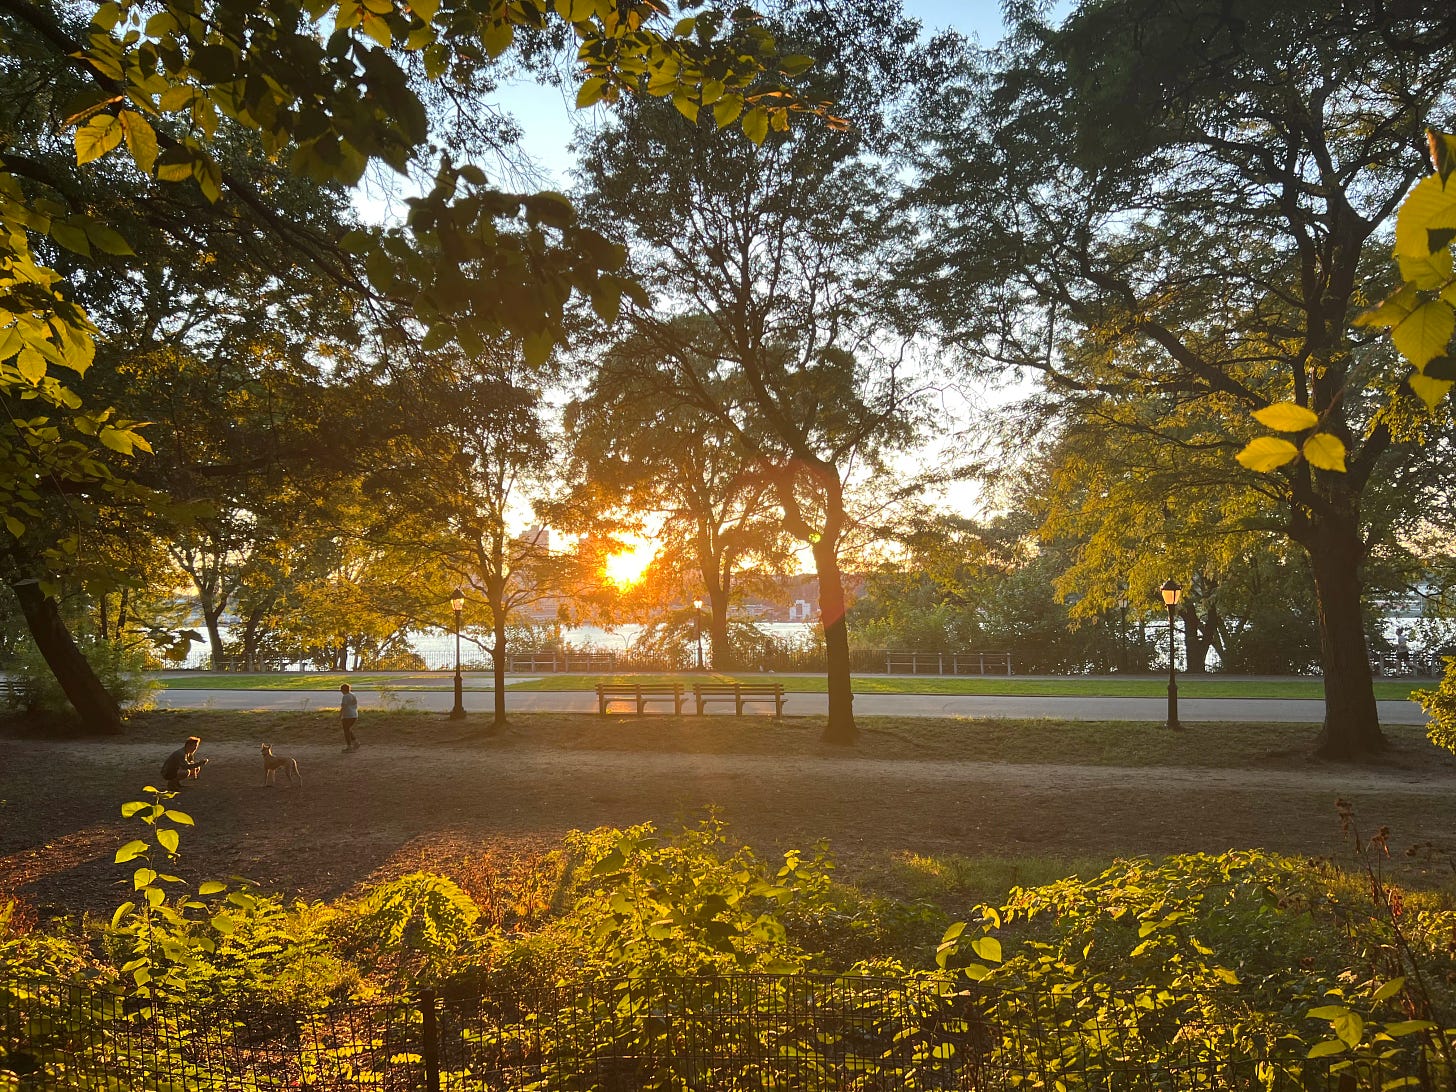 Sunset and Hudson through trees